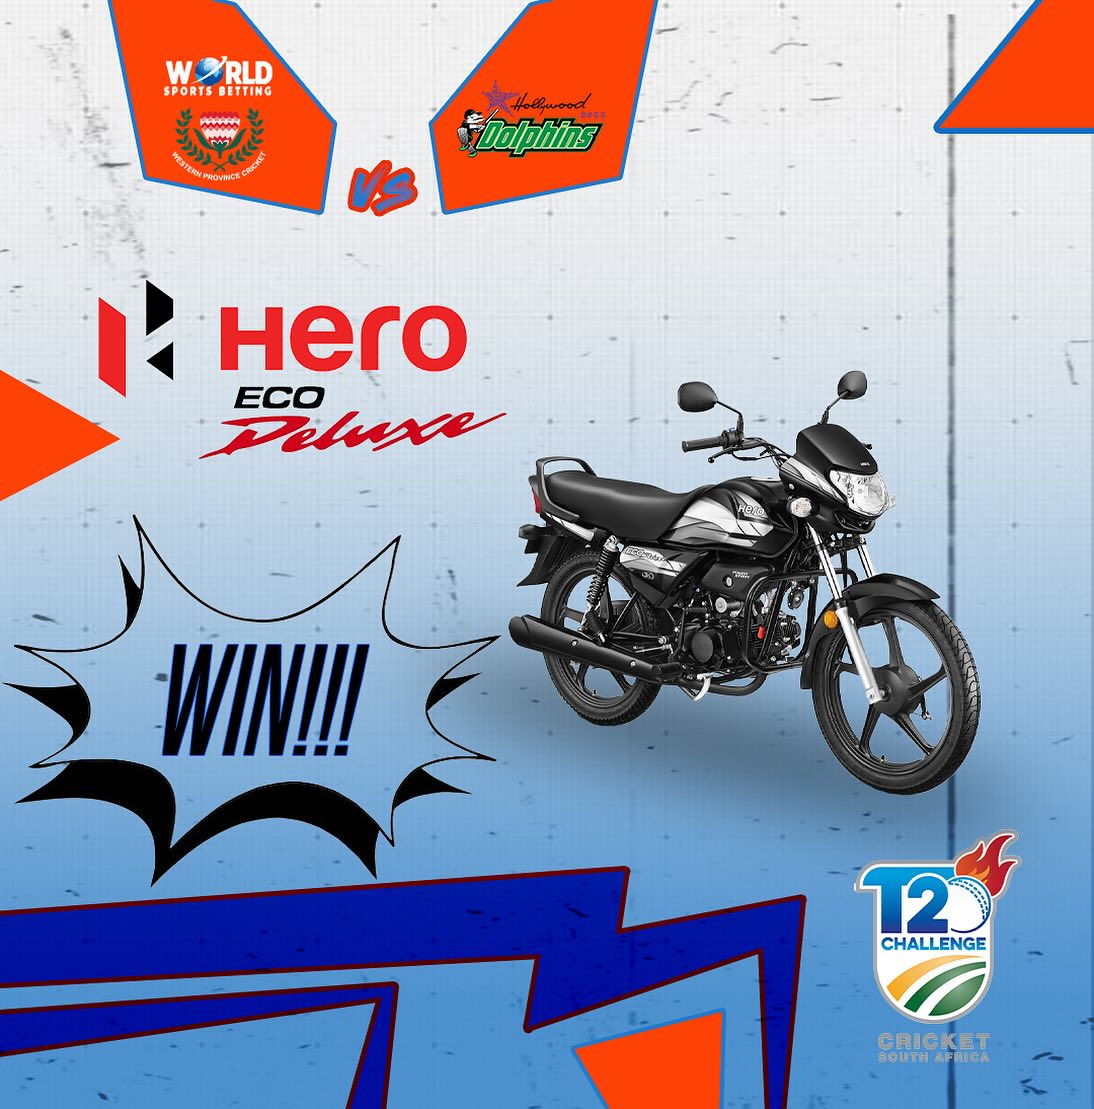 Don’t forget you could be the lucky one to win a Hero Eco Deluxe if you attend our home game against the Hollywoodbets Dolphins tomorrow at WSB Newlands. Keep your eyes peeled to our page to see how you can enter and win!!! #boysinblue💙 #WSBWP🧡 #hiekomnding #herosouthafrica